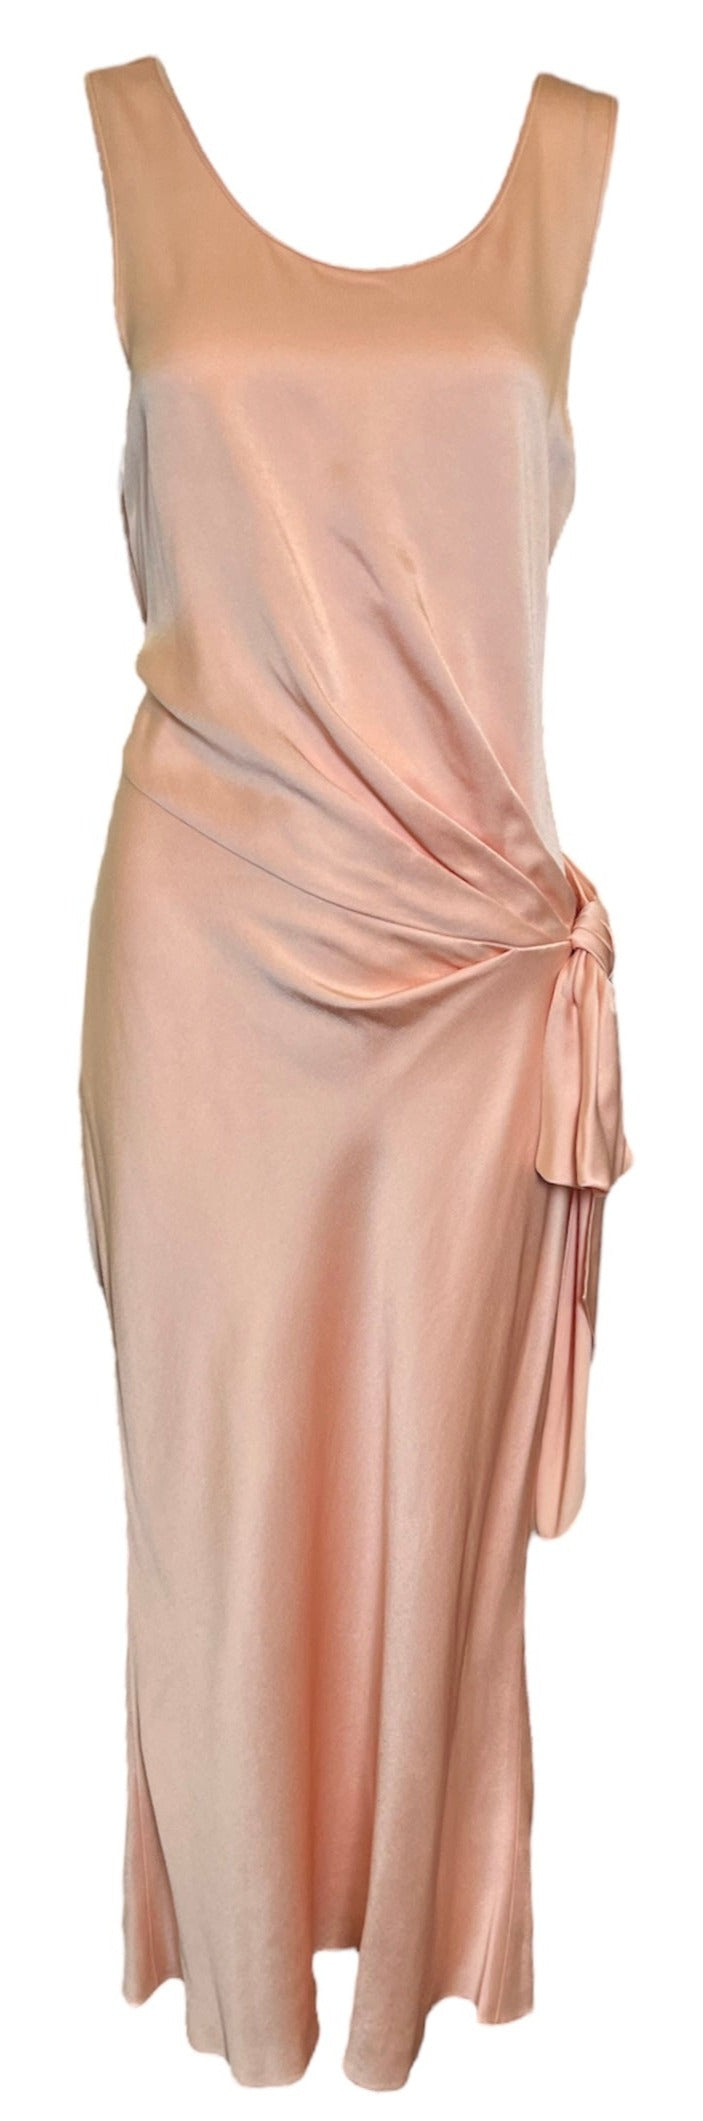  John Galliano 2000s Peachy Pink 1930s Inspired  Bias Cut Gown FRONT 1 of 5